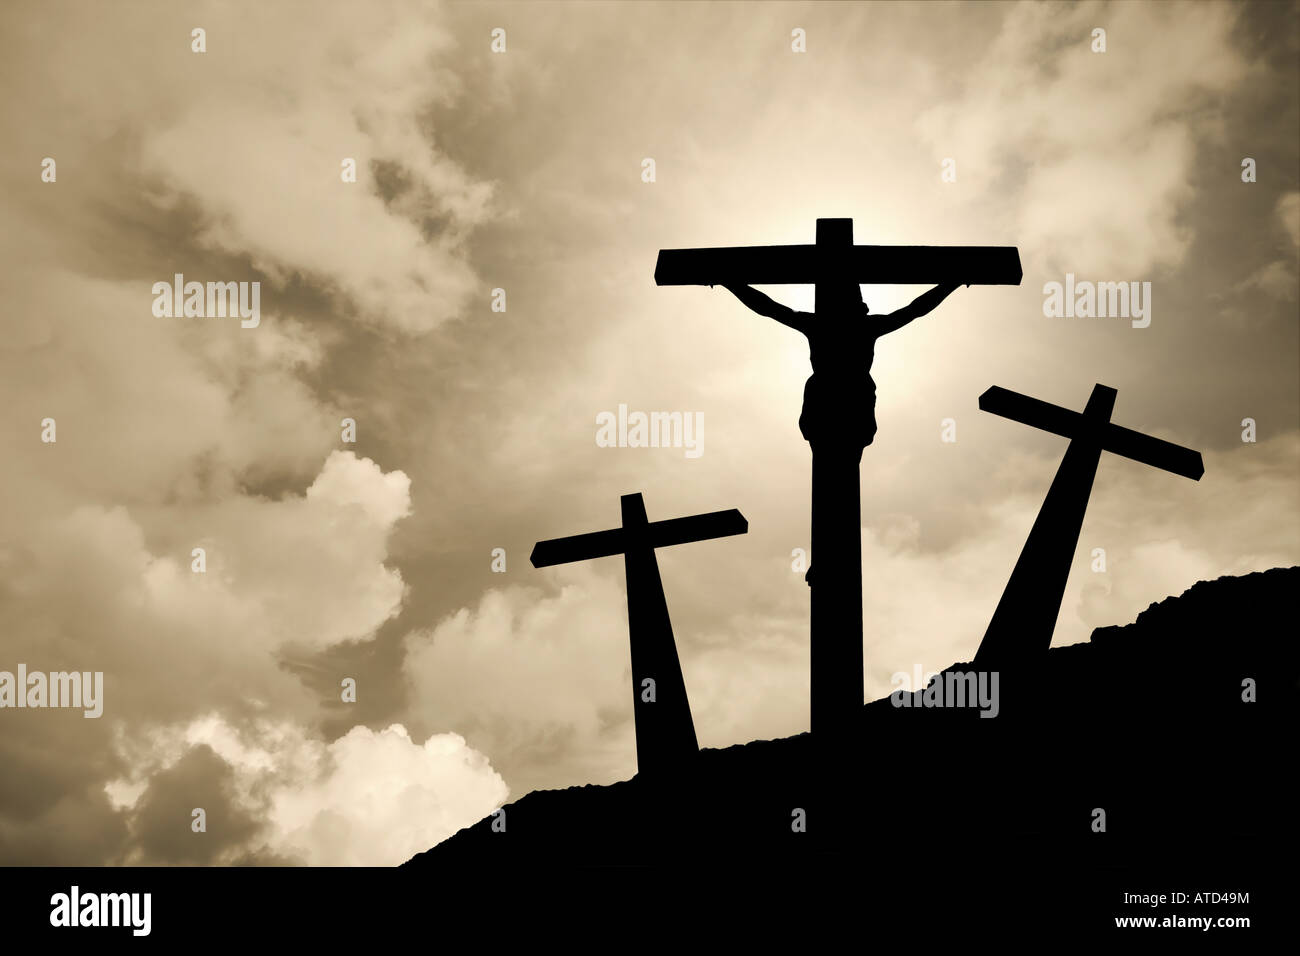 Jesus Christ crucified in Golgotha /// crucifixion Easter crucifix Calvary passion backlit silhouette cross religion god Christianity clouds storm sky Stock Photo